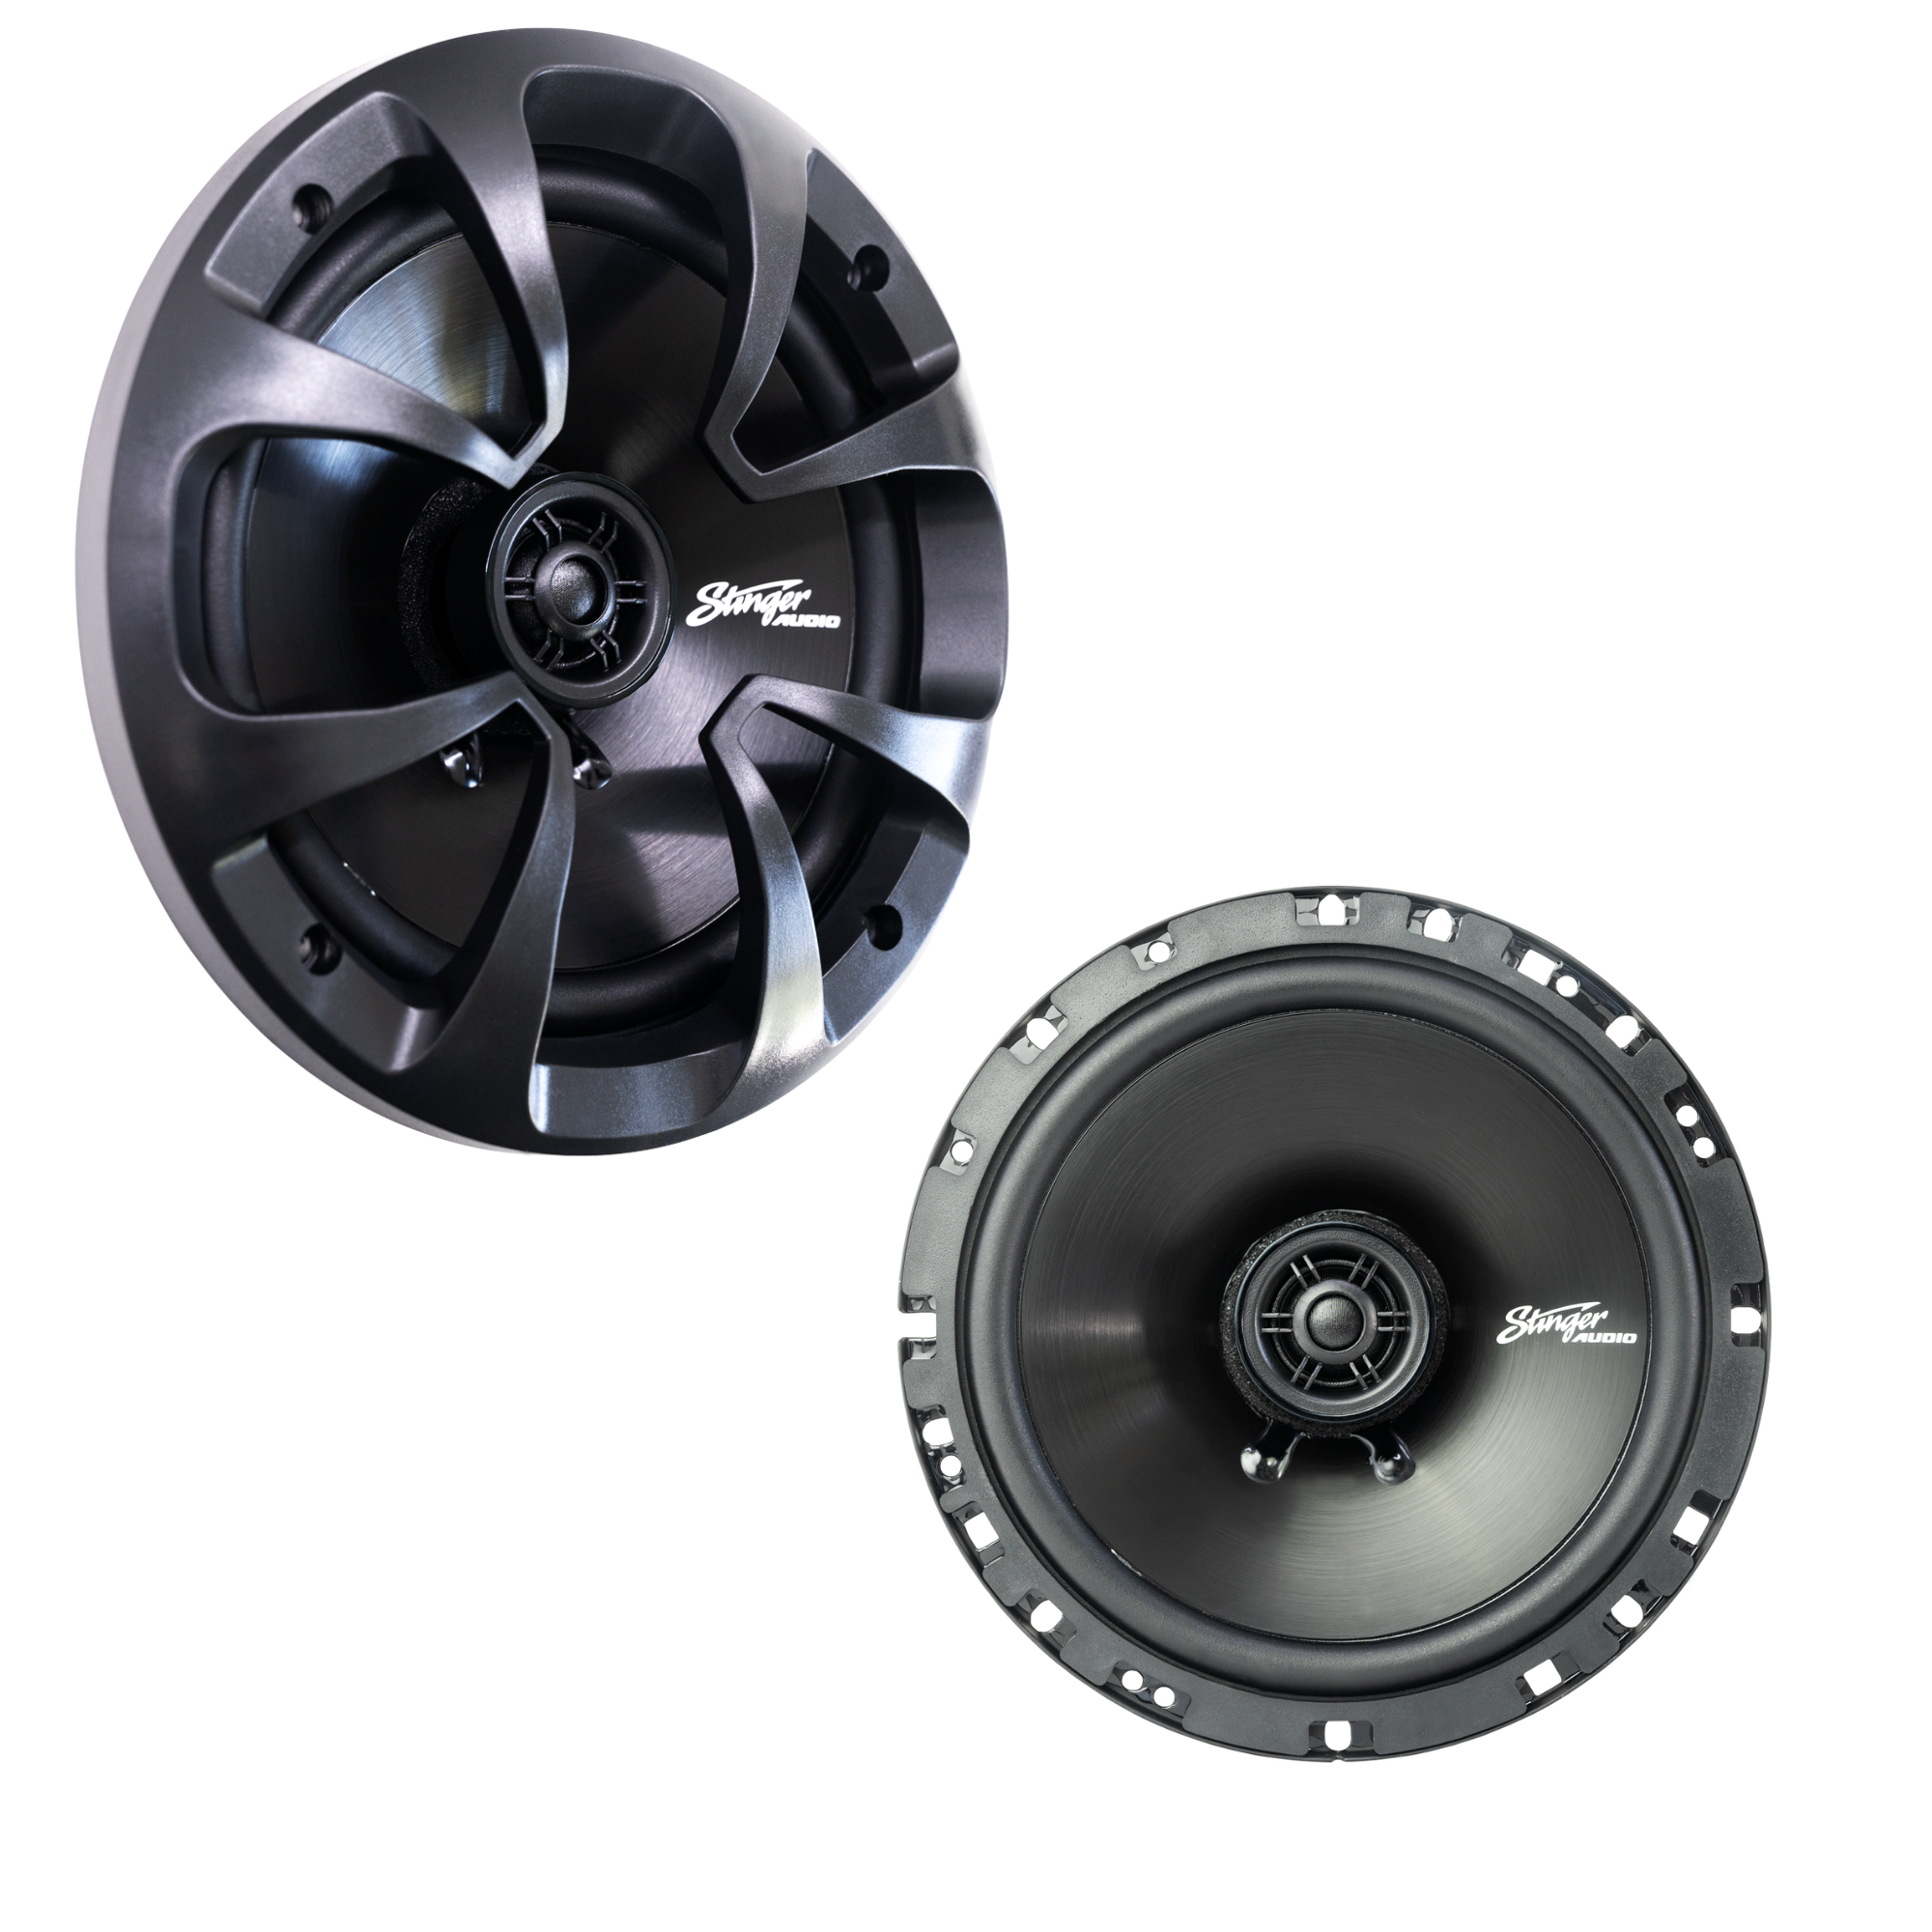 Stinger Audio 6.5" 50 Watt (RMS) Coaxial Car Speakers (Set of Two; one with grill and one without) on a white background